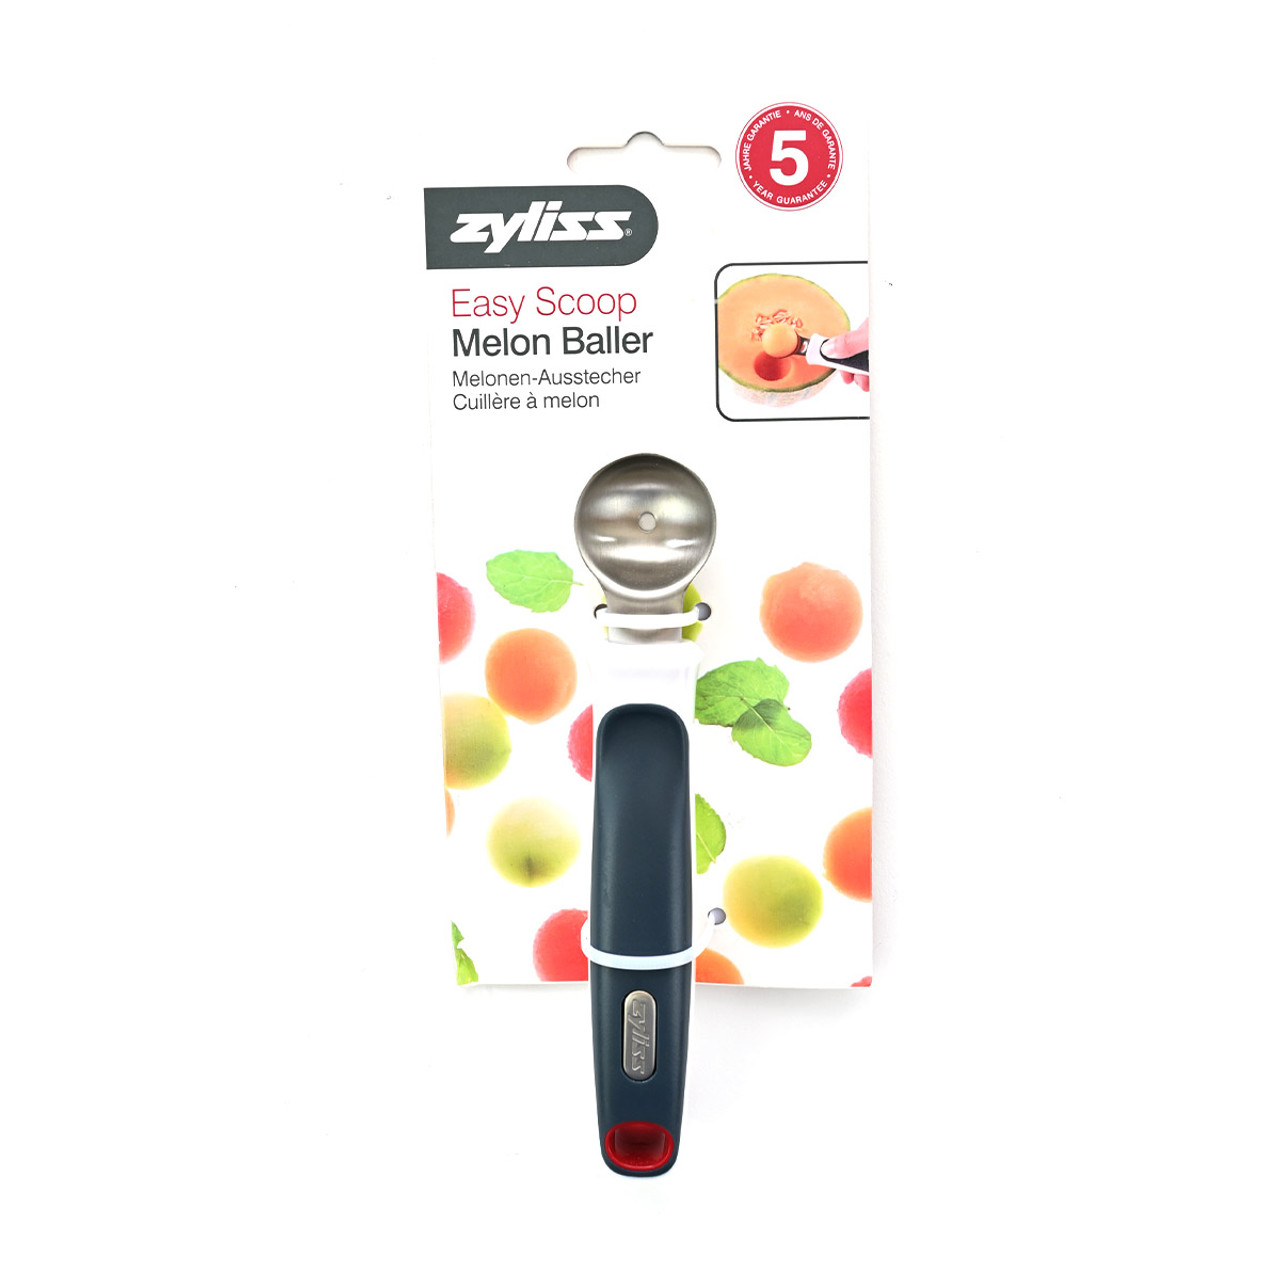 https://cdn11.bigcommerce.com/s-tfv7q8thbe/images/stencil/1280x1280/products/8600/22656/Grocery-Easy-Scoop-Melon-Baller-Zyliss-1__59435.1615842619.jpg?c=2